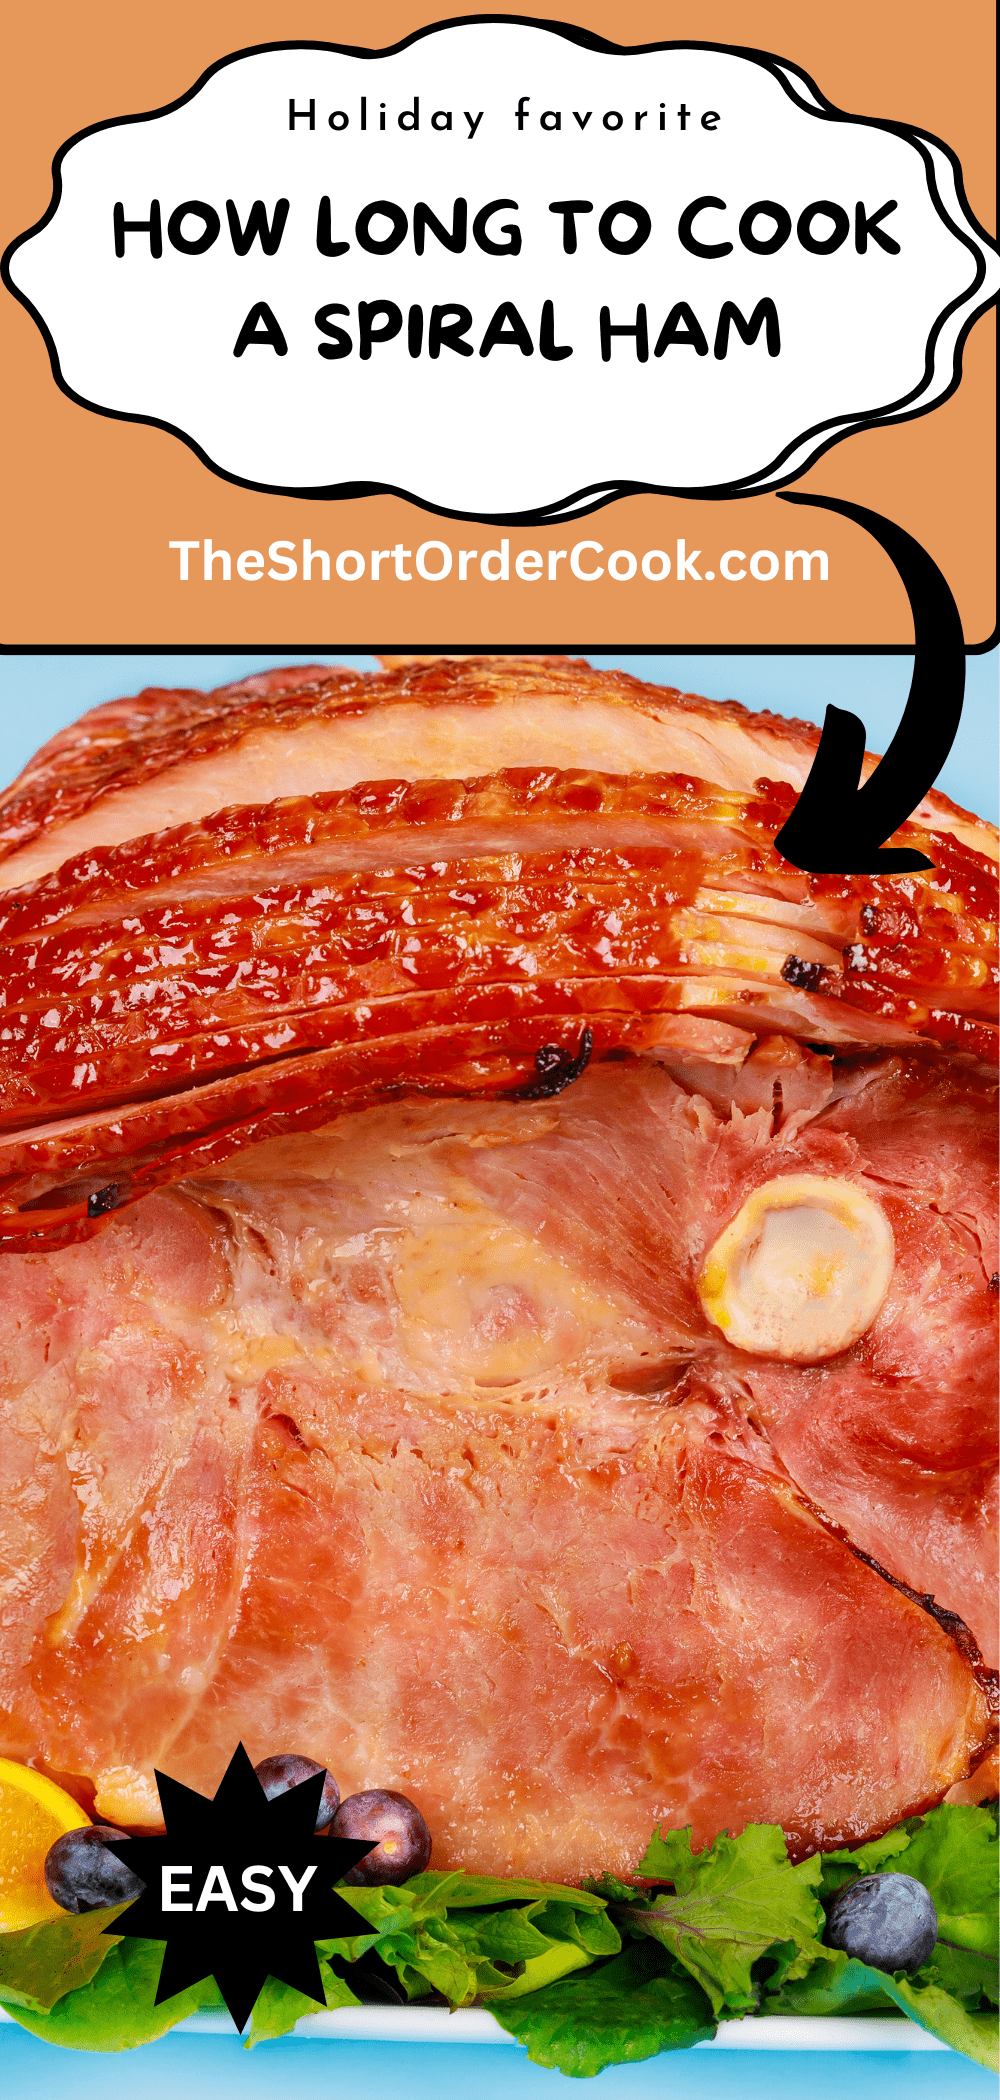 Spiral ham on the bone up close golden and ready to slice.